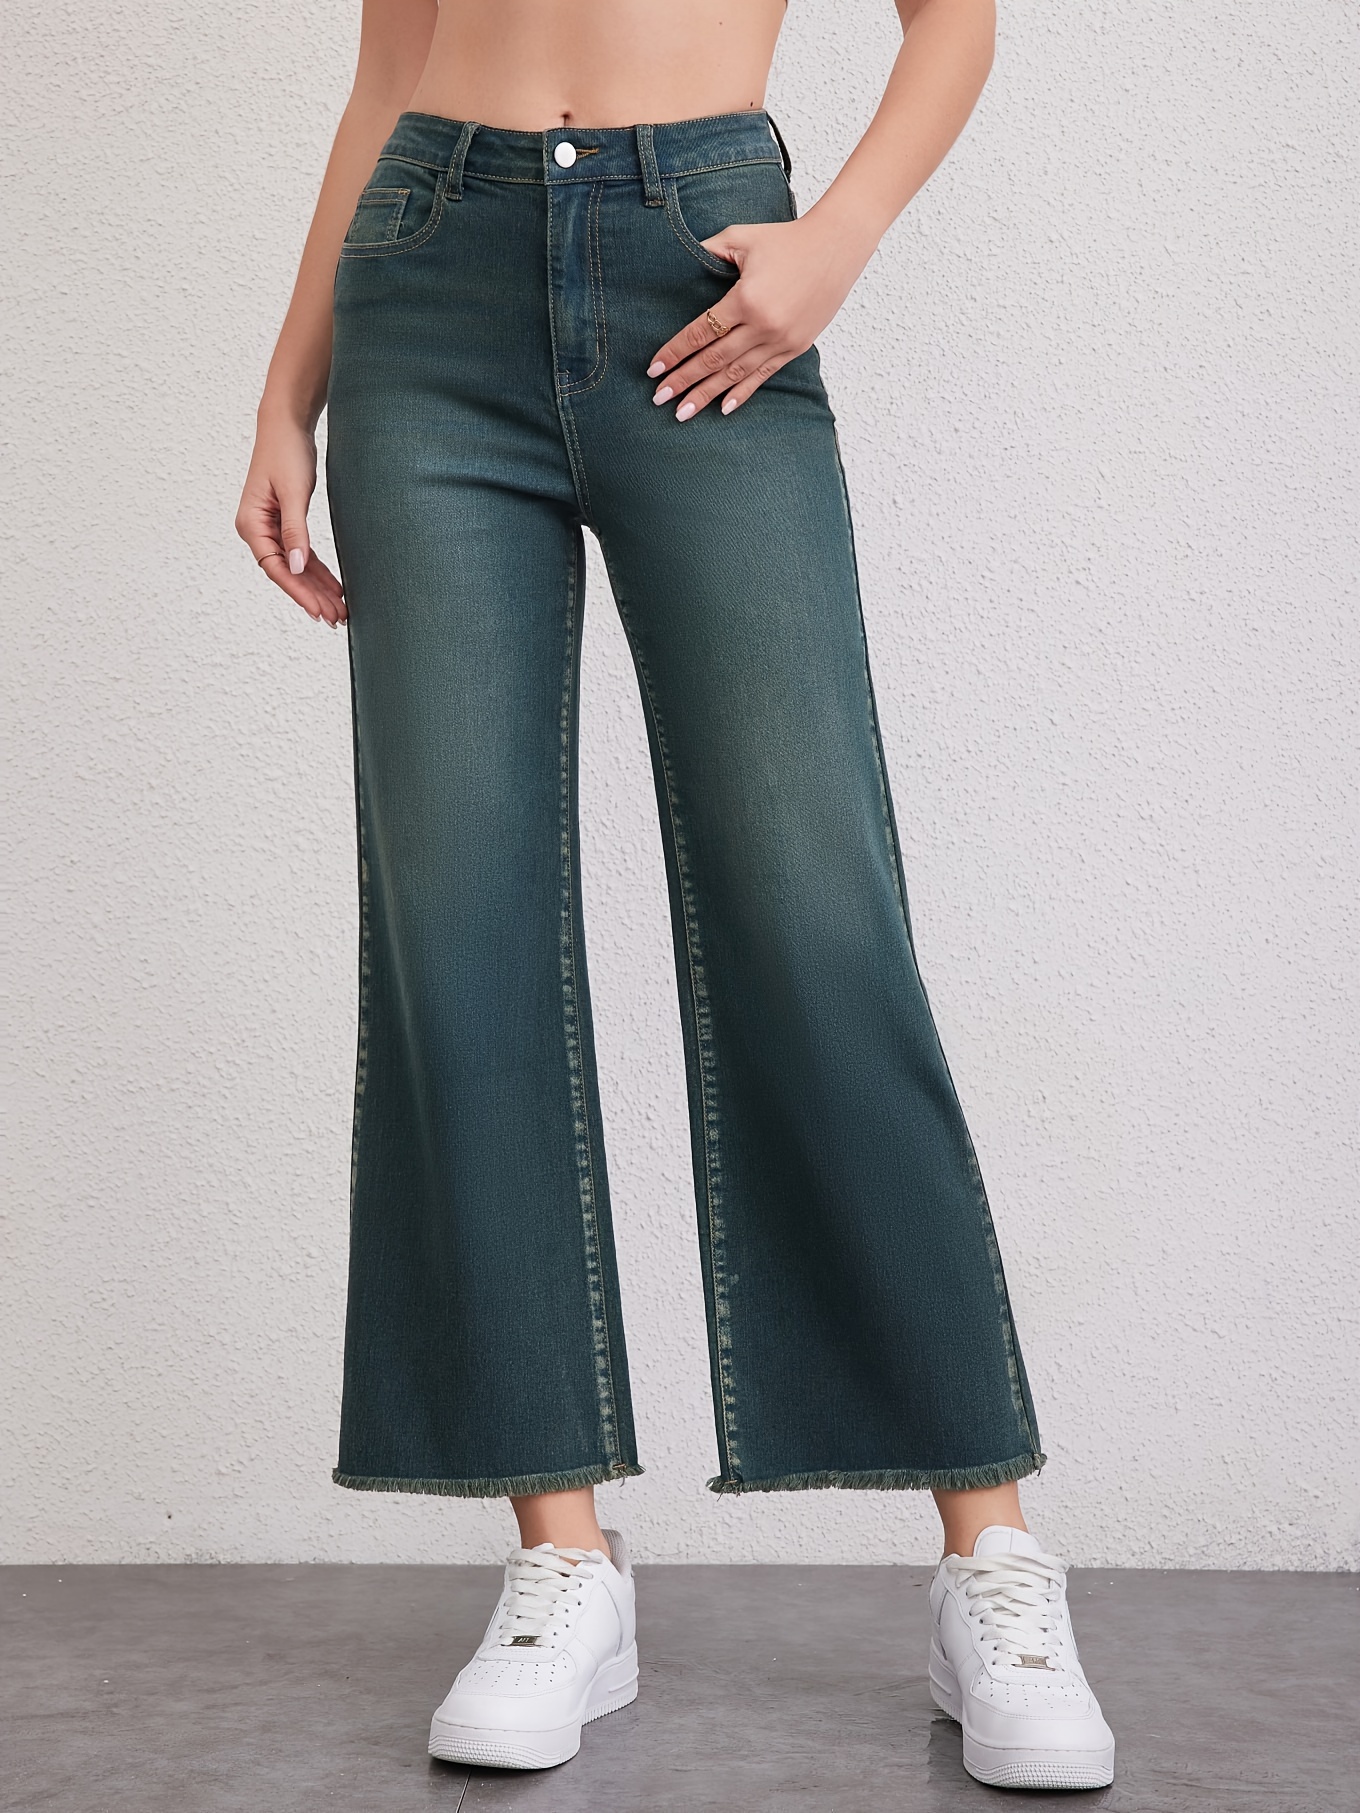 Buy 70s Frayed Hem Jeans Online In India -  India